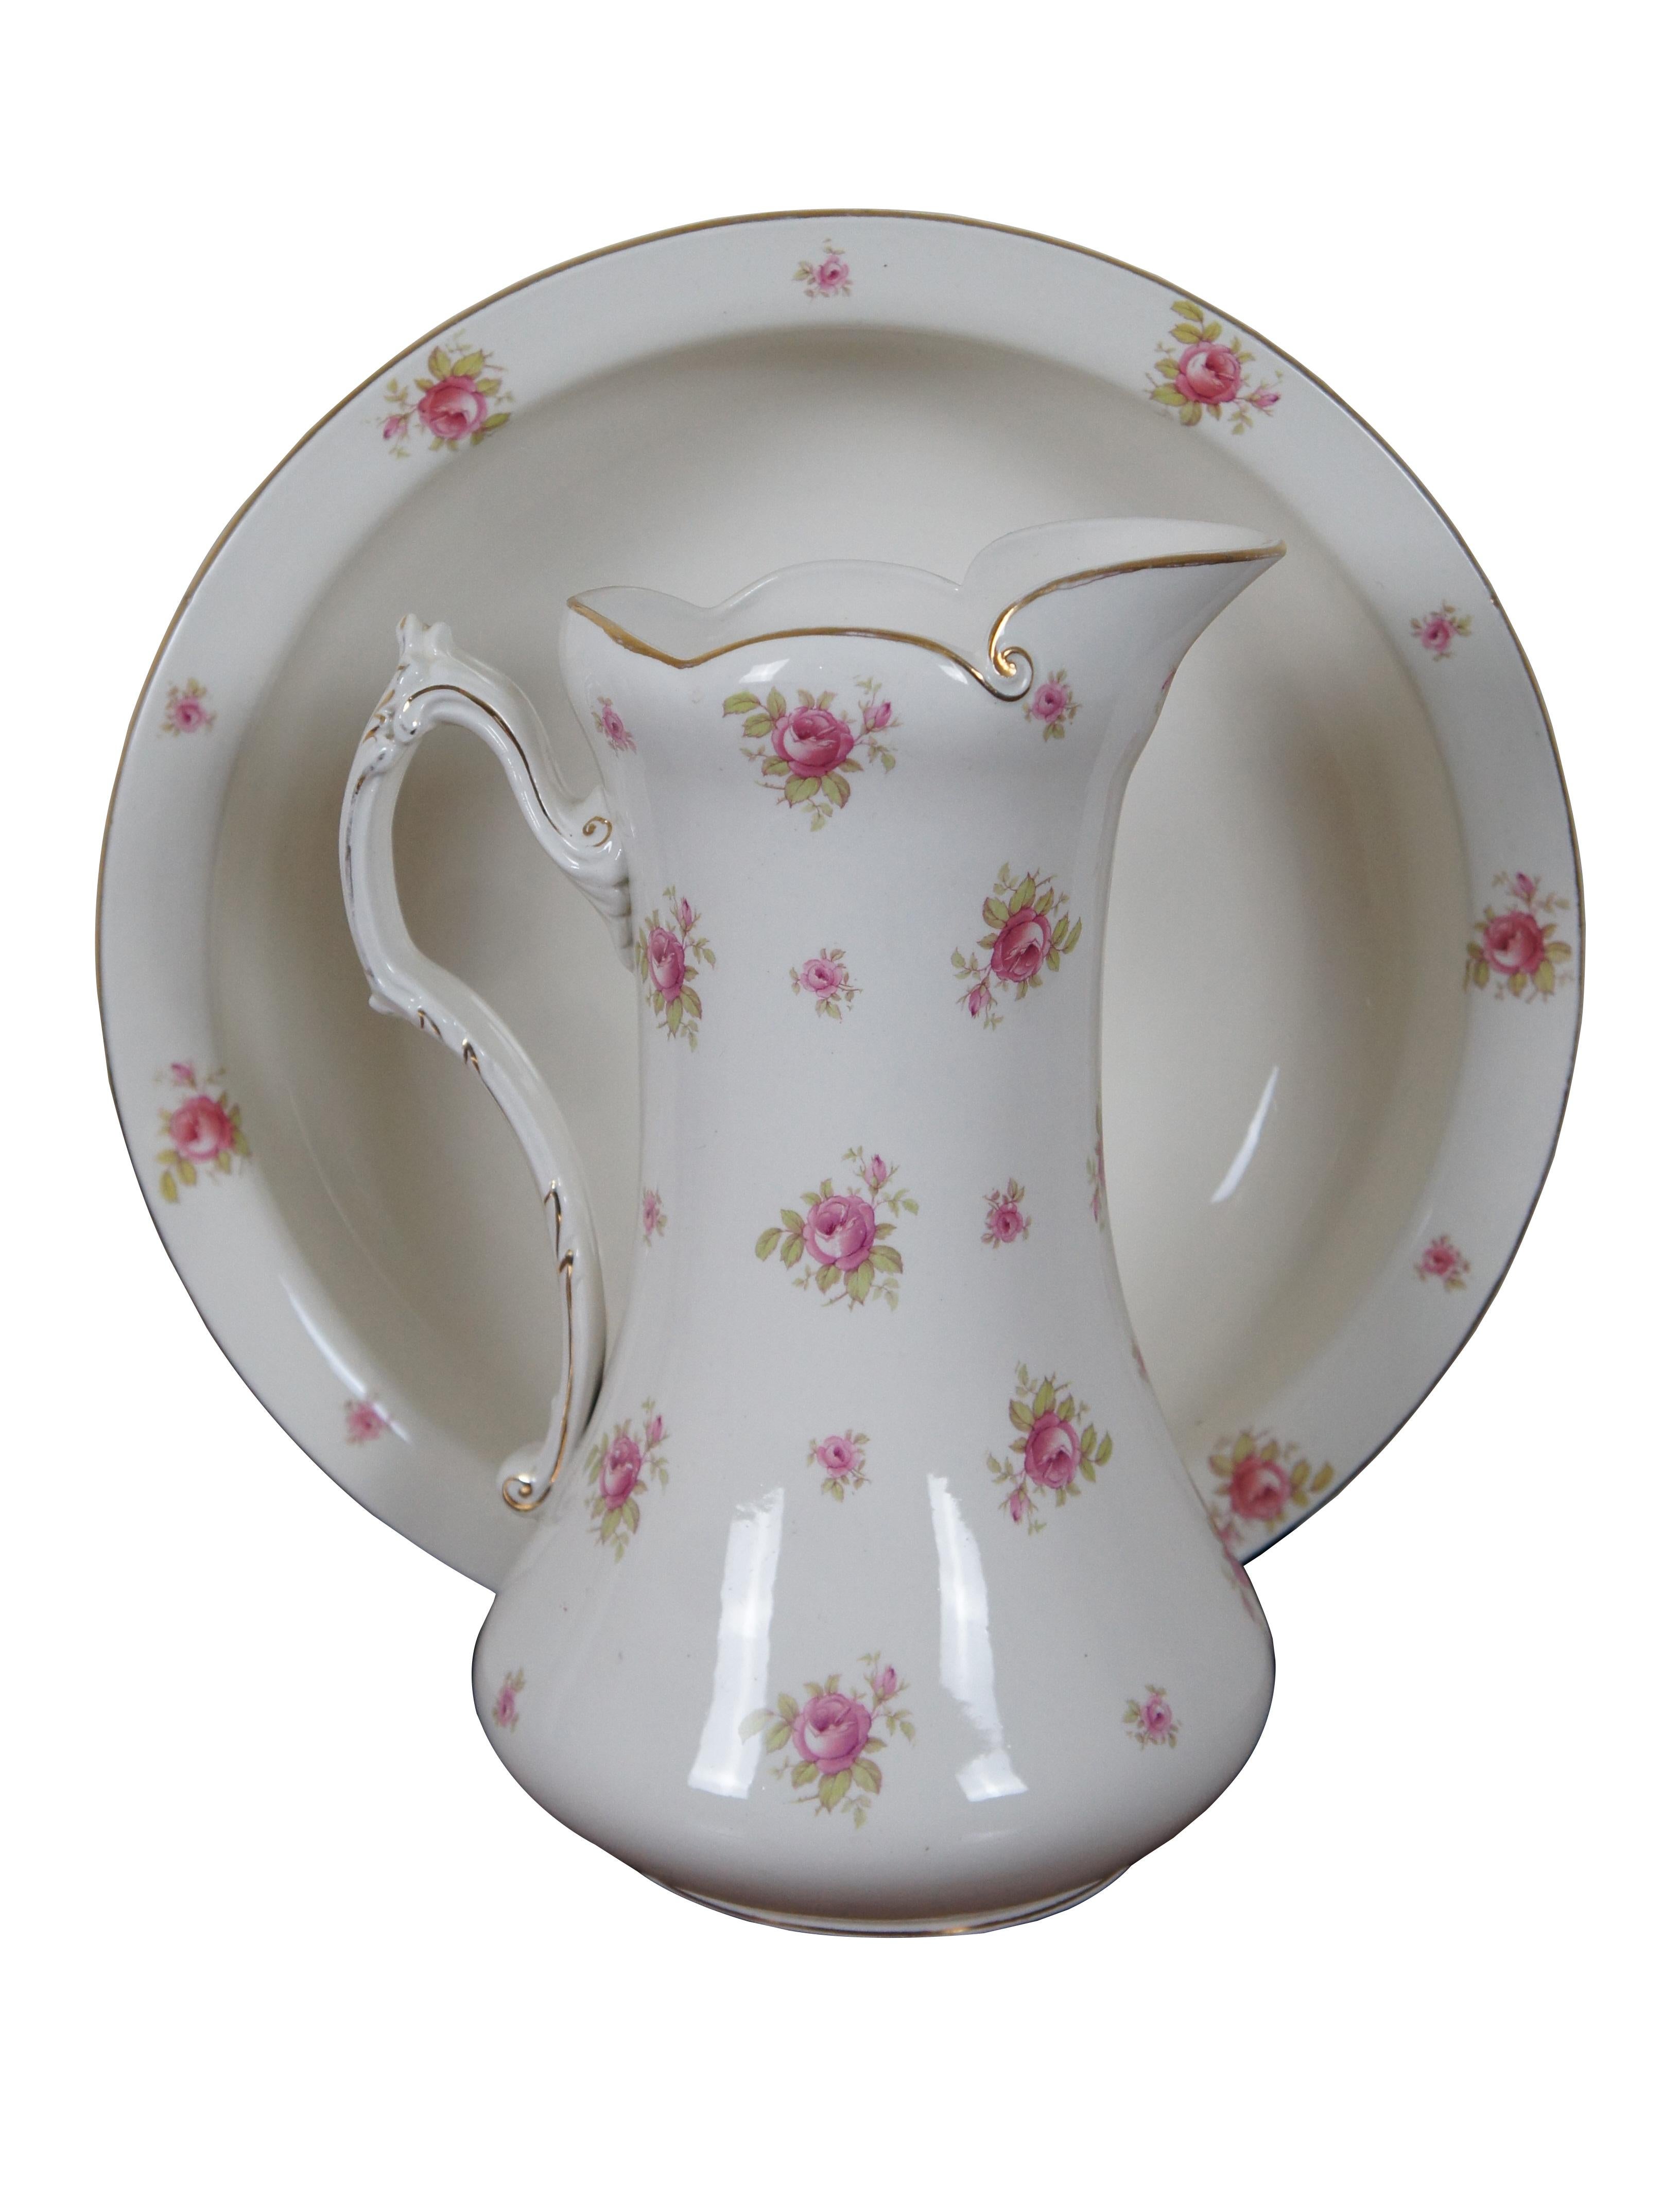 Antique English porcelain pitcher / ewer and wash basin / bowl set from Alfred B. Pearce & Company featuring printed pink roses and gilded accents. 

Alfred B. Pearce was a porcelain and glassware retailer that was established at Ludgate Hill,